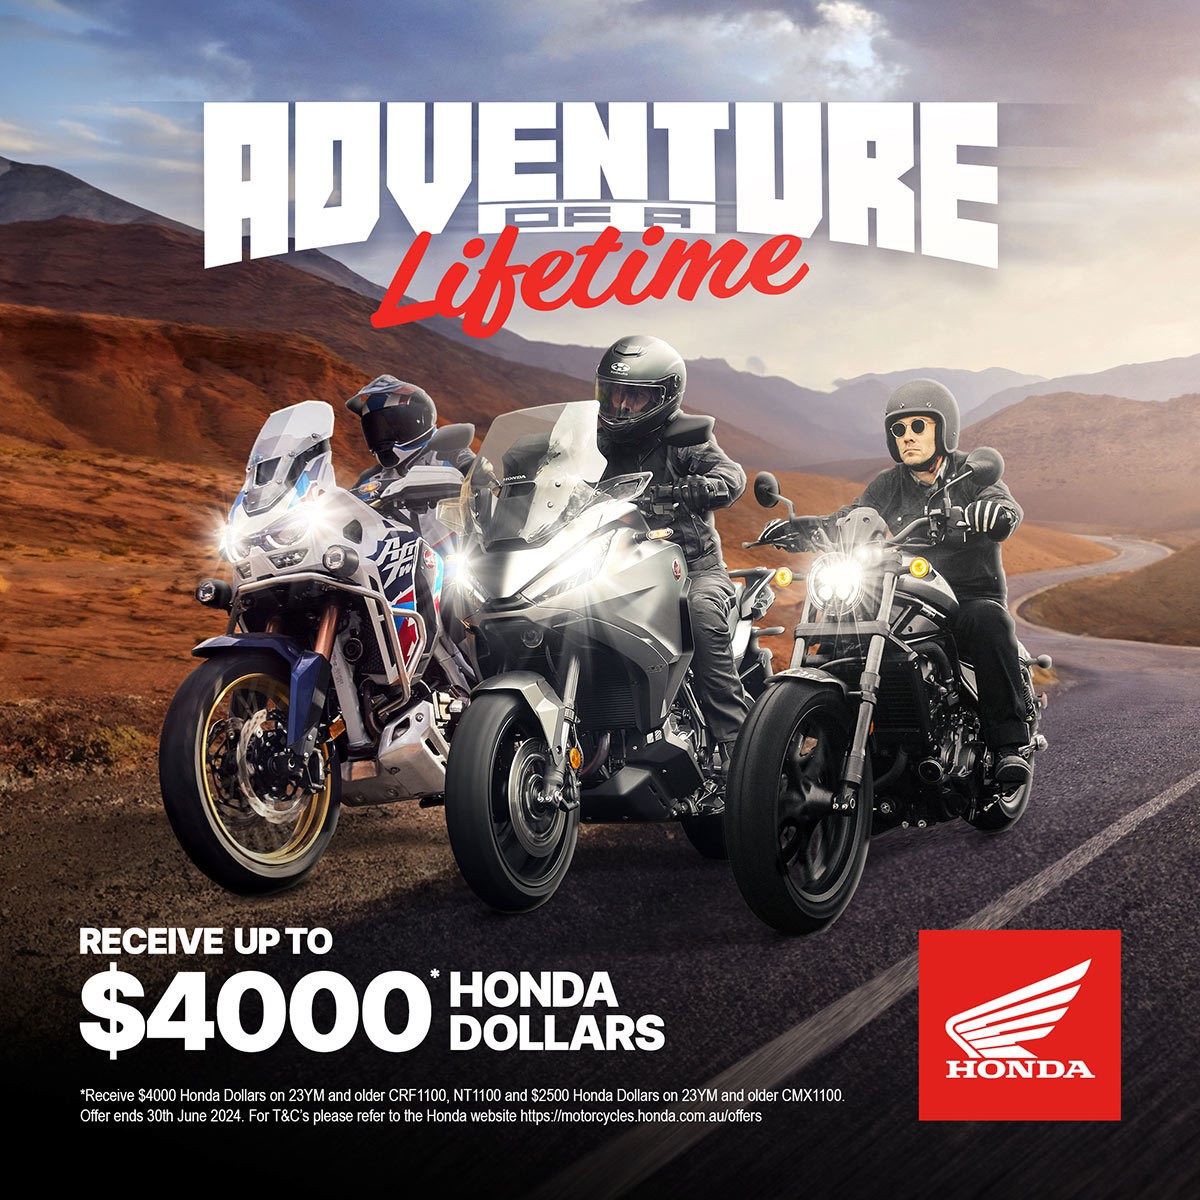 Adventure of a lifetime receive up to $4000 Honda Dollars!